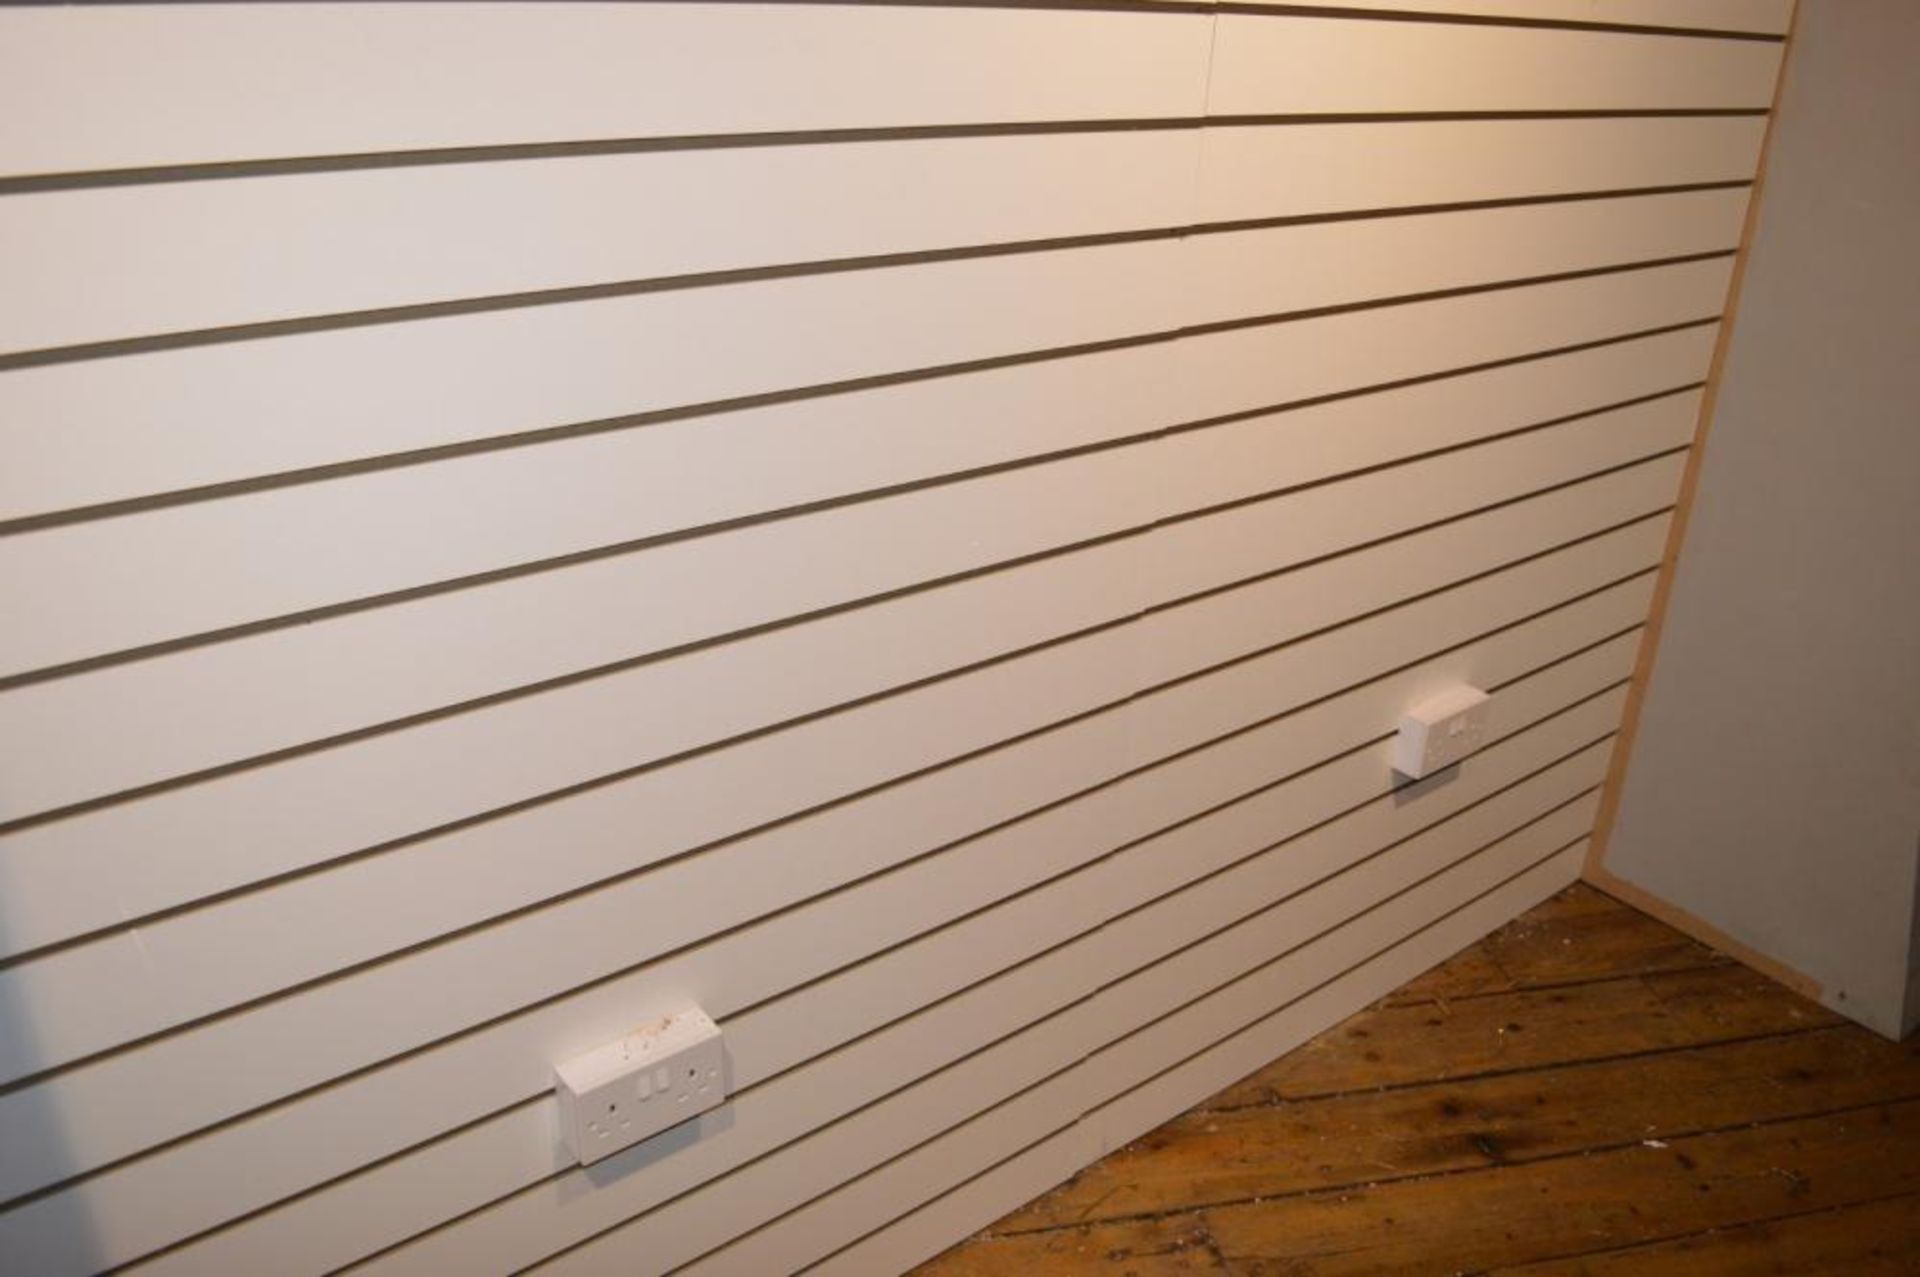 1 x Retail Slat Wall Display Unit - Features Two Slat Walls With Illuminated Display End, Shelf Ends - Image 5 of 8